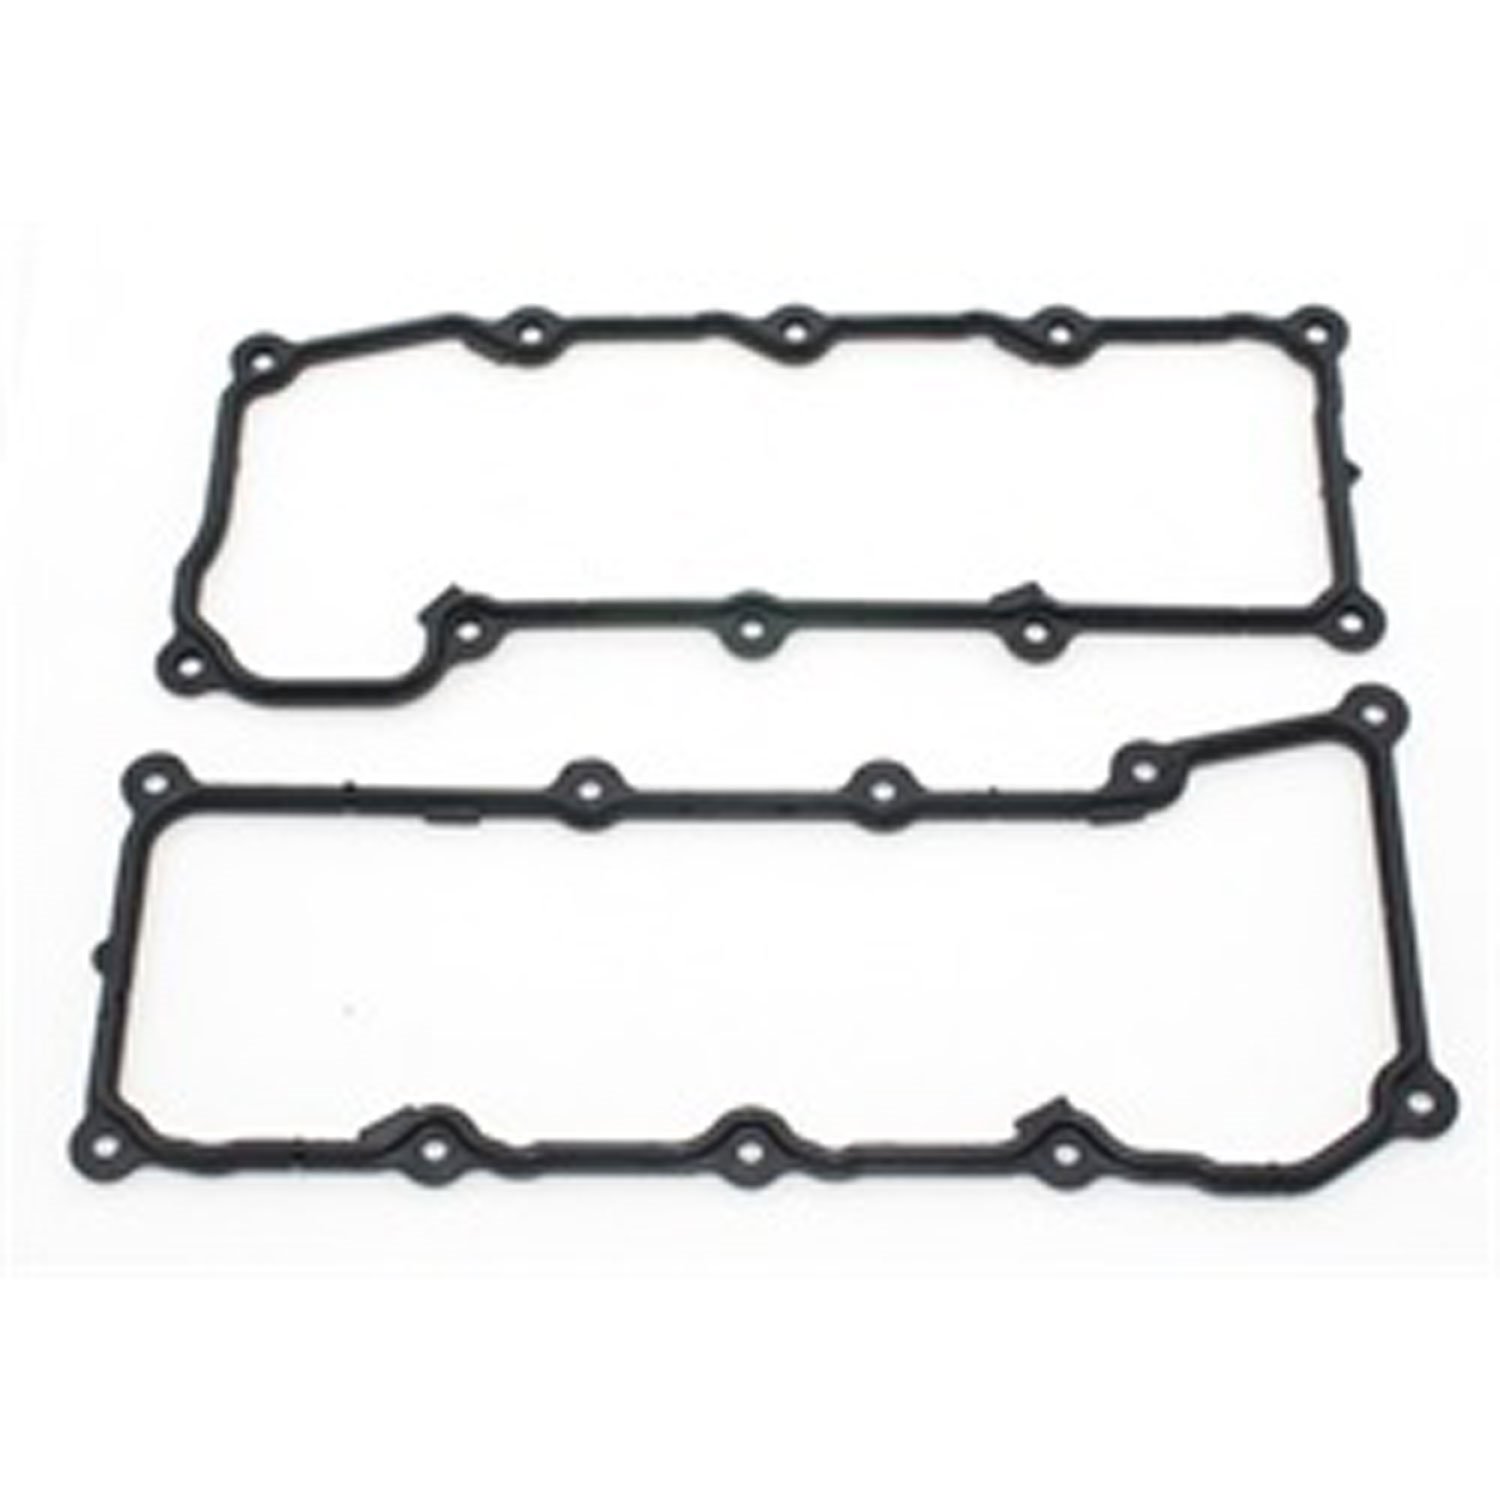 Lh Valve Cover Gasket 3.7 2002-2005 Jeep Liberty KJ By Omix-ADA